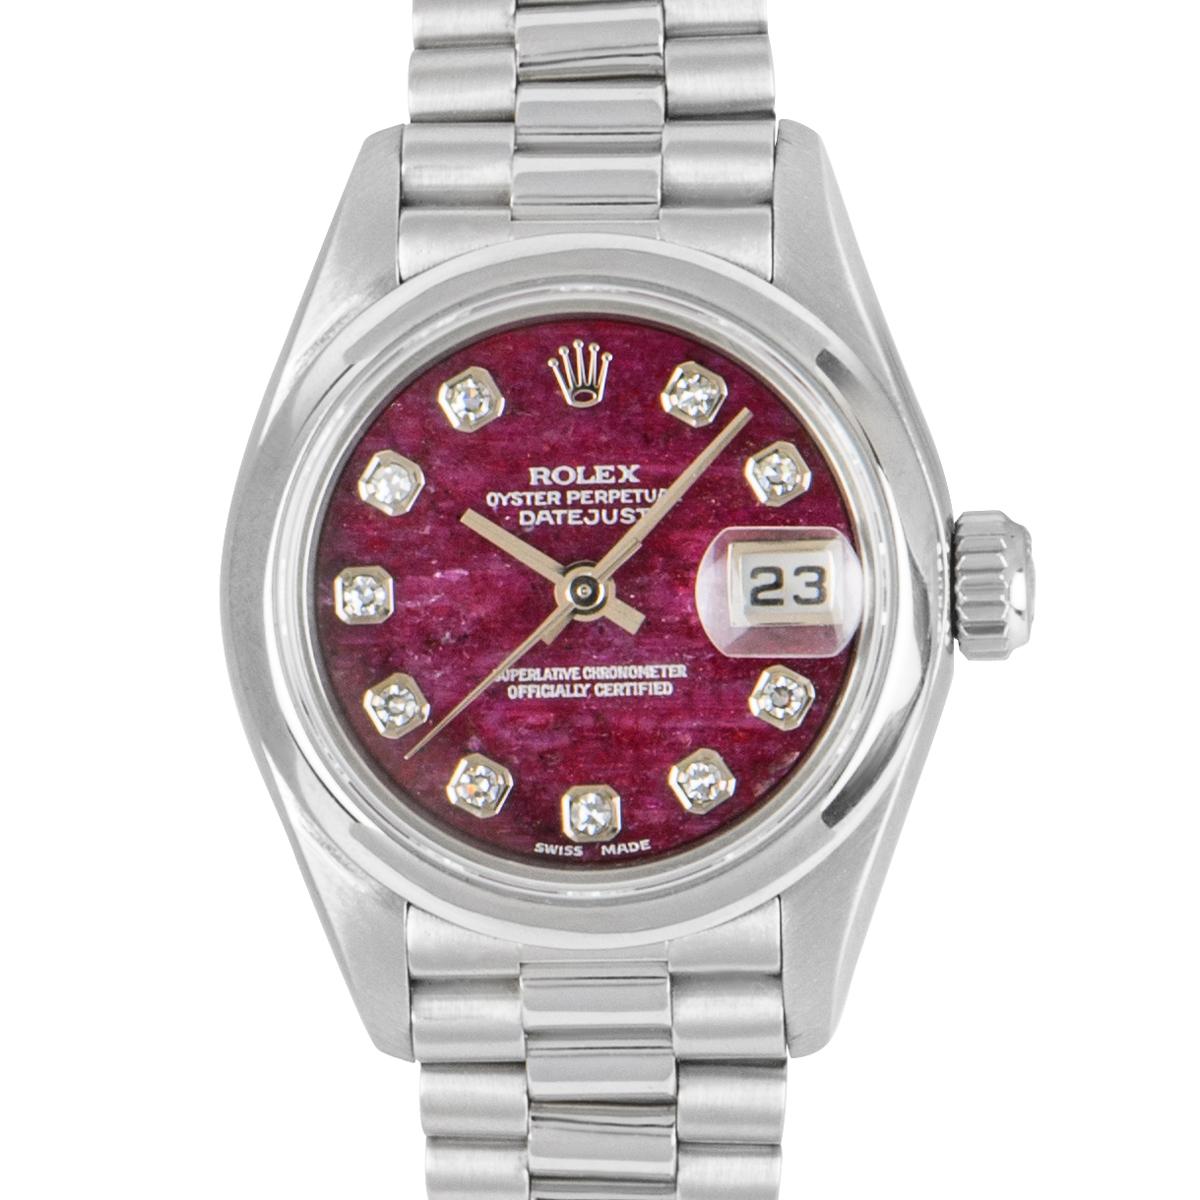 A Platinum Oyster Perpetual Datejust Ladies Wristwatch, rare rubellite stone dial set with 10 applied round brilliant cut diamond hour markers, date at 3 0'clock, a fixed platinum smooth bezel, a platinum president bracelet with a concealed platinum